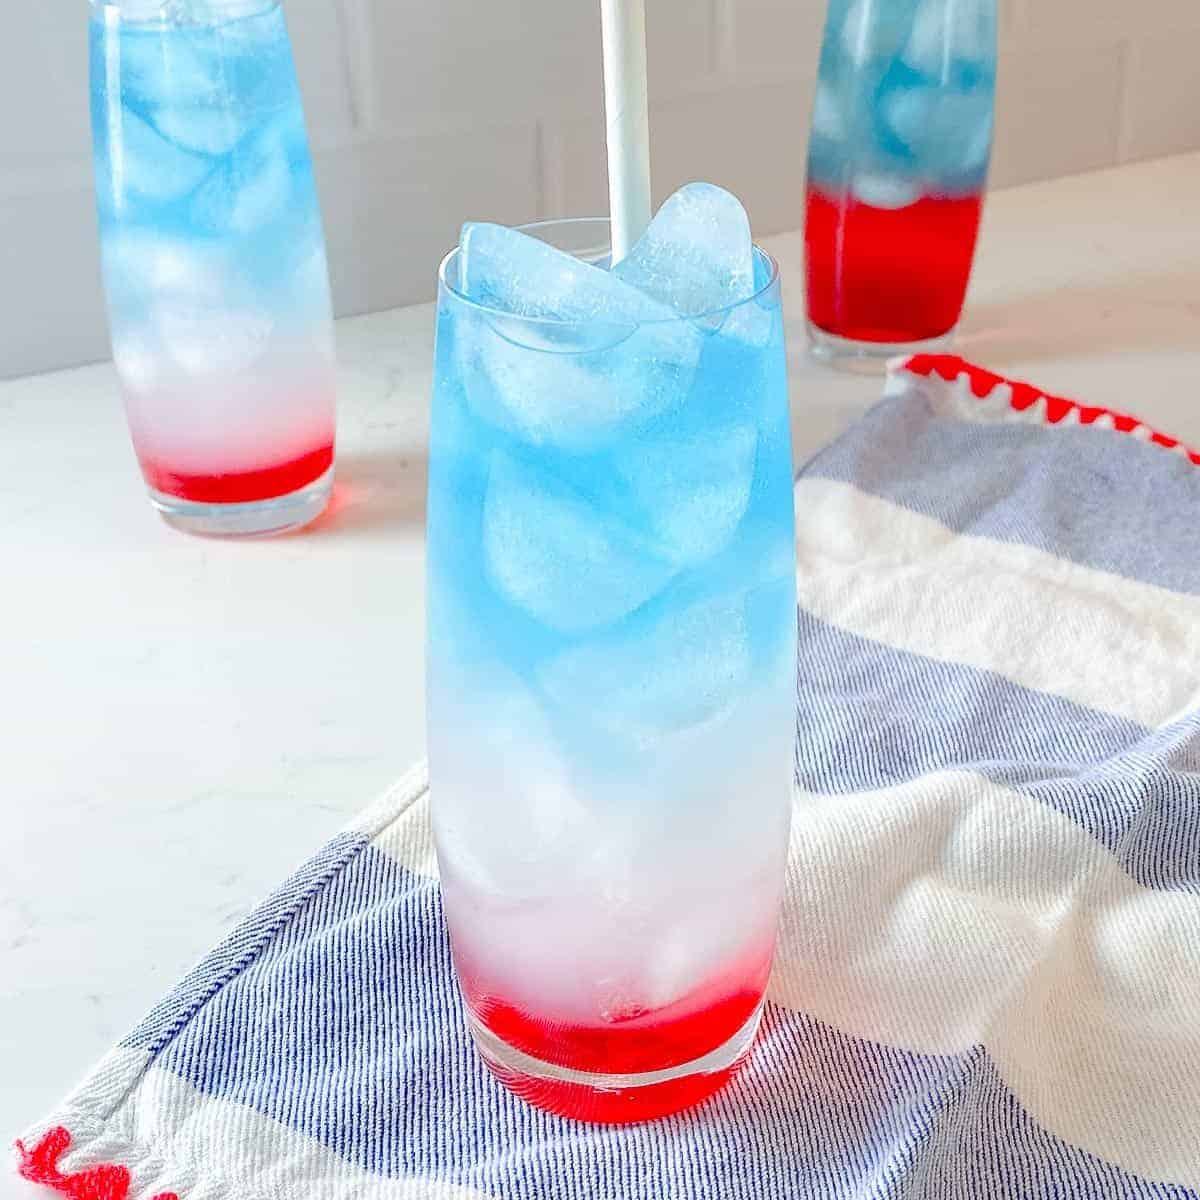 Bomb Pop Drink (Red, White, Blue Cocktail)